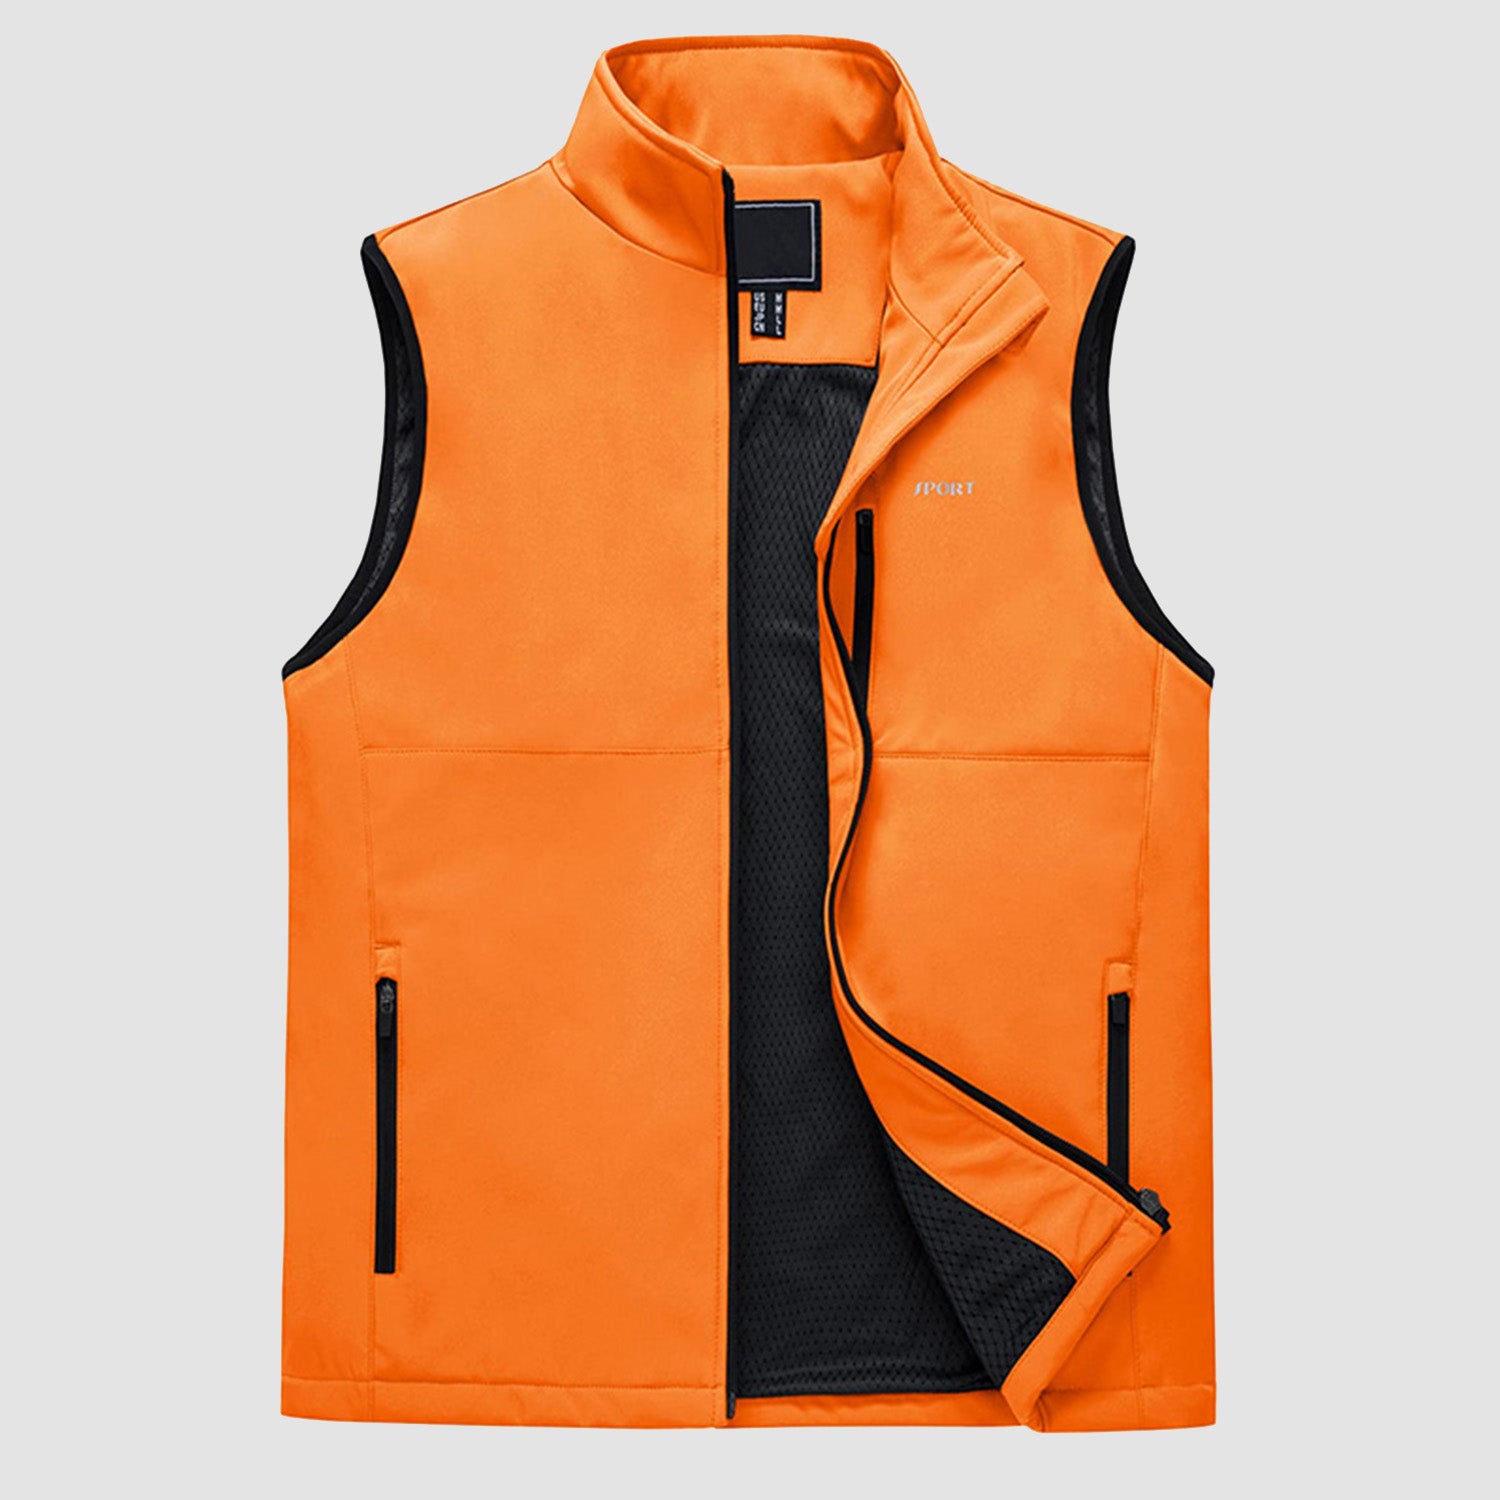 Simplmasygenix Clearance Men's Leather Coat Zipper Thin Sports Multi-bag  Quick-drying Loose Vest Mountaineering Tooling Outdoor Vest 